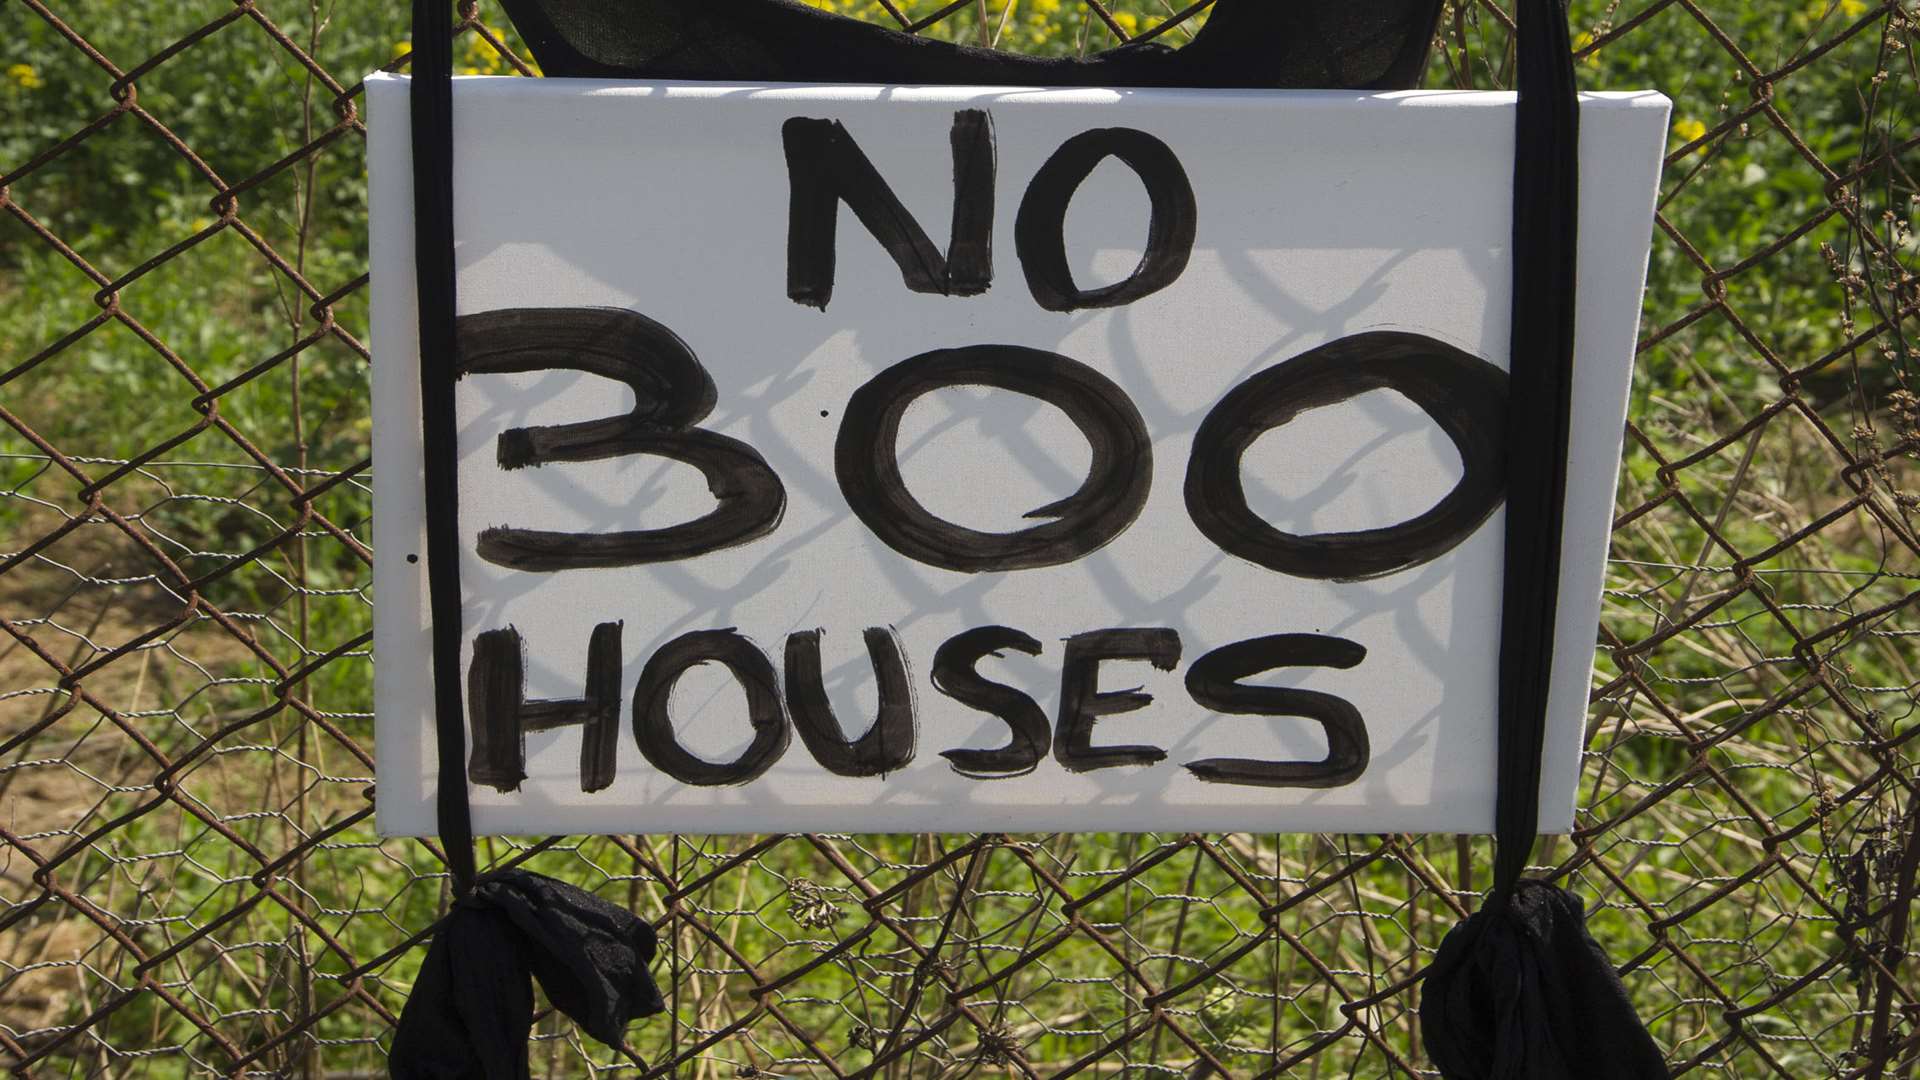 Nearby residents have put up signs protesting against the proposed housing